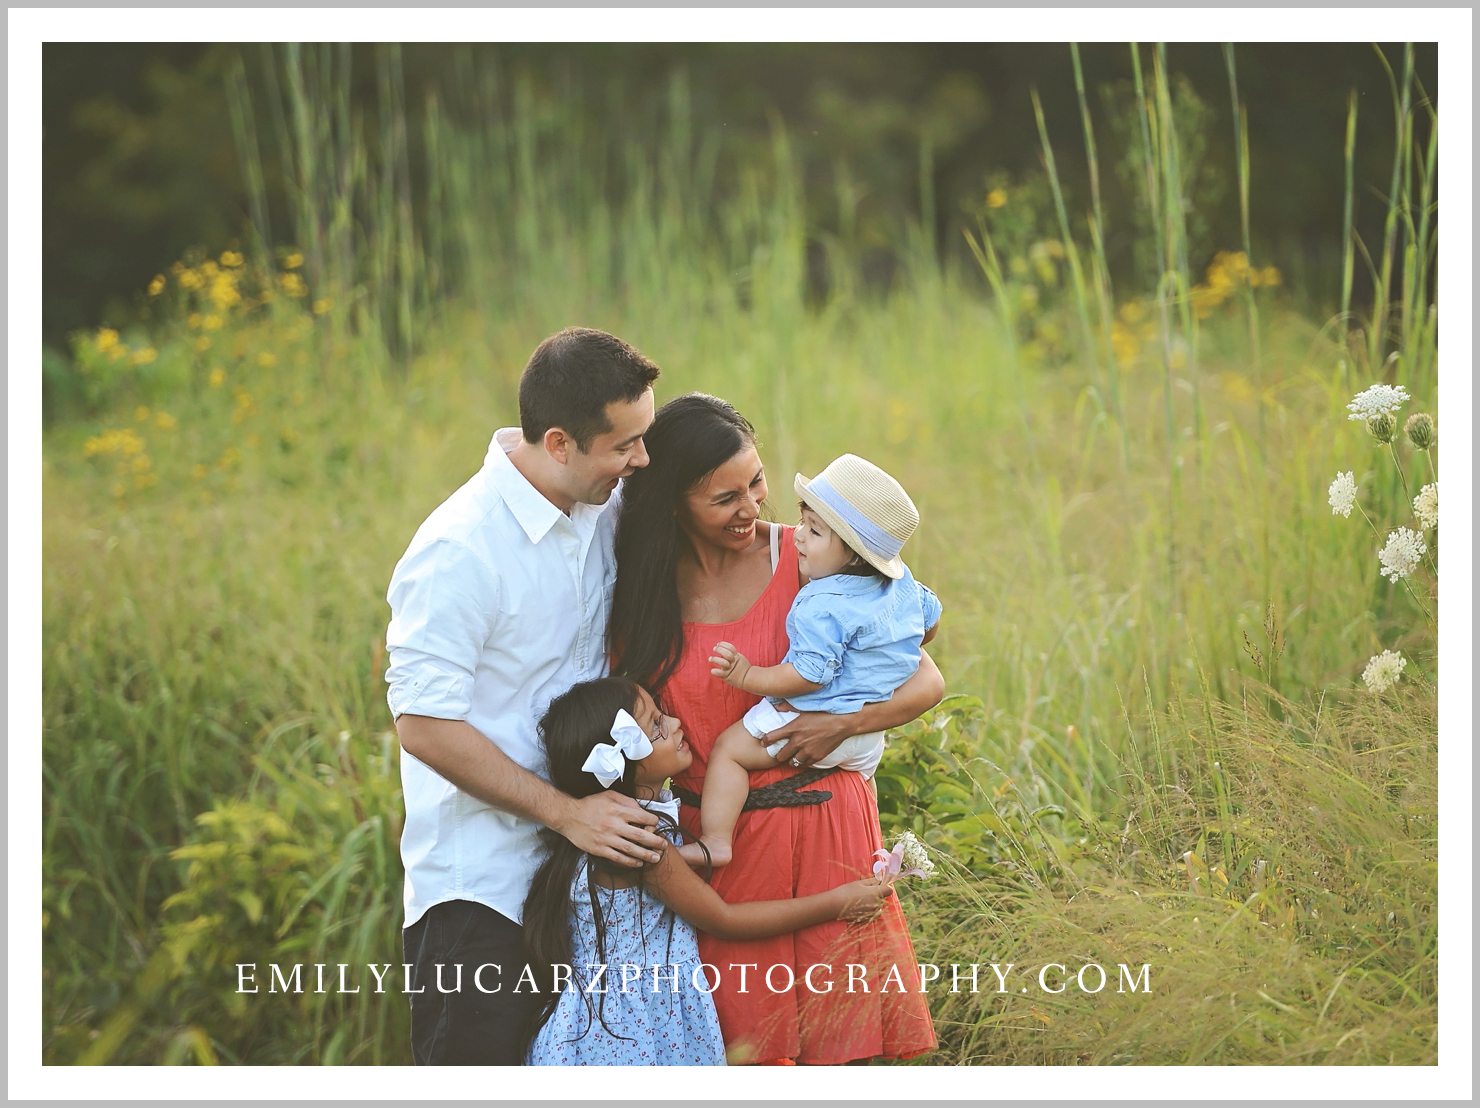 St. Louis child and family photographer